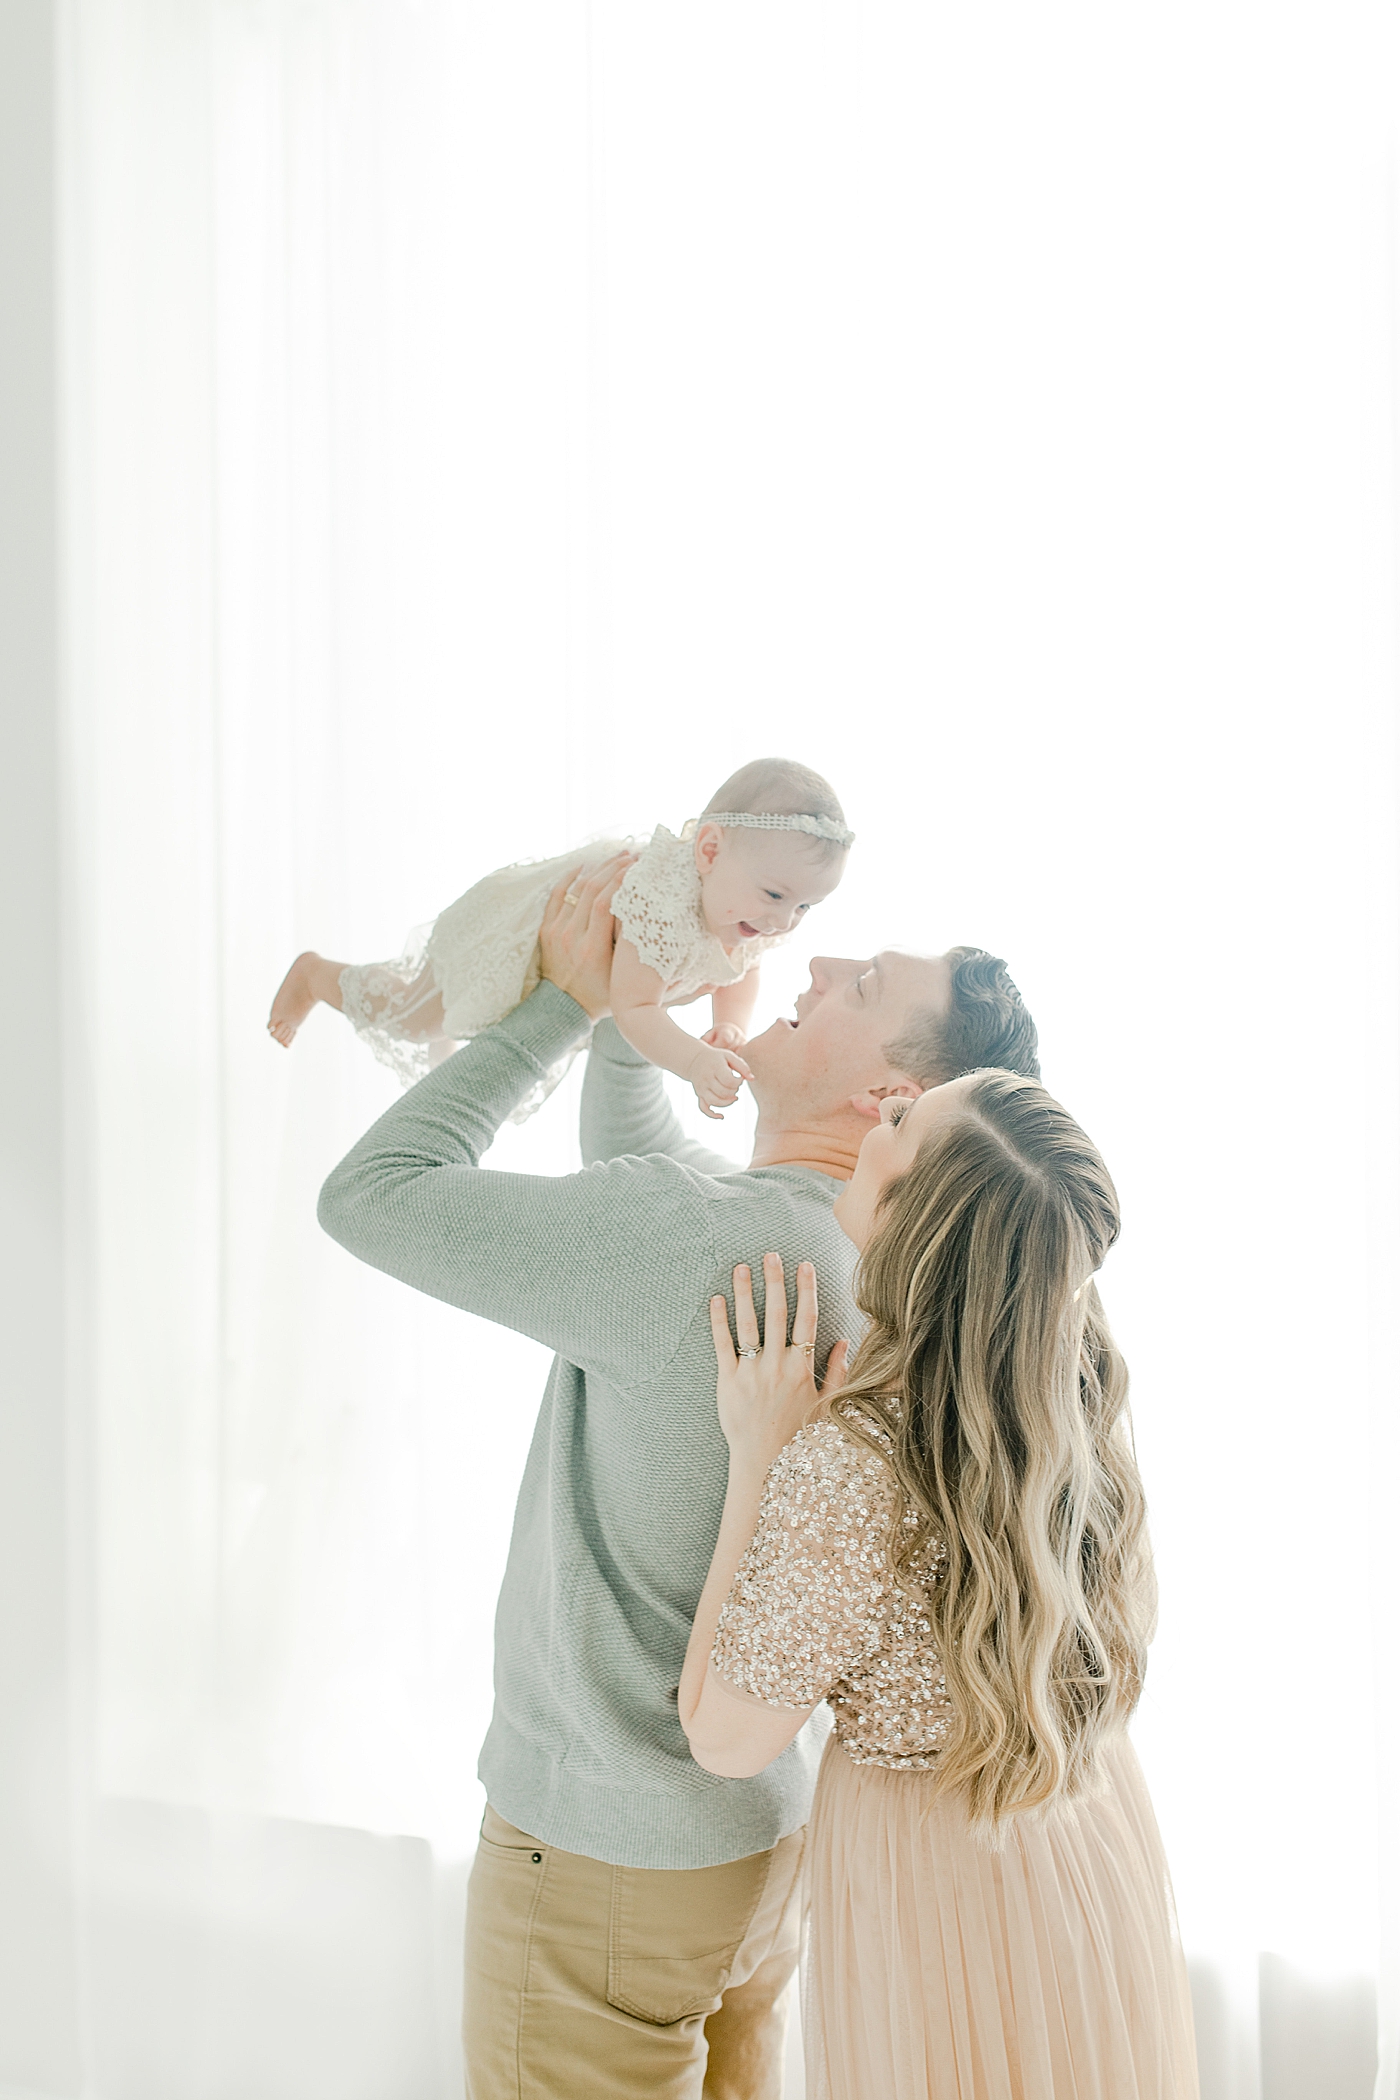 Mom and dad laughing with their baby girl | Photo by Little Sunshine Photography